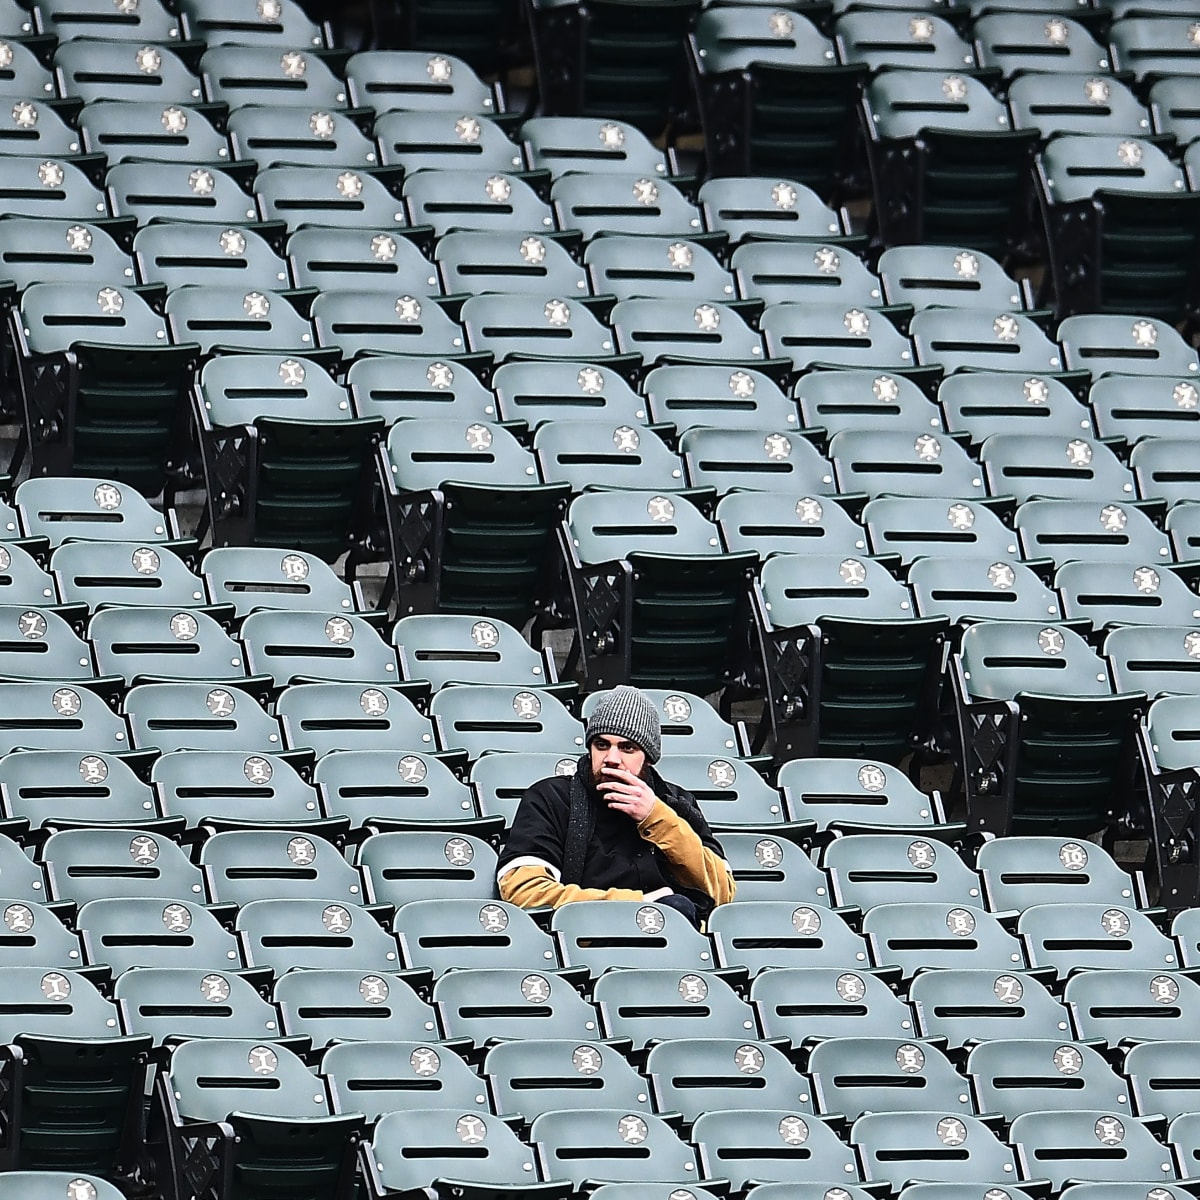 Fear Not, White Sox Fans: You'll Get Used To 'Guaranteed' Field : NPR